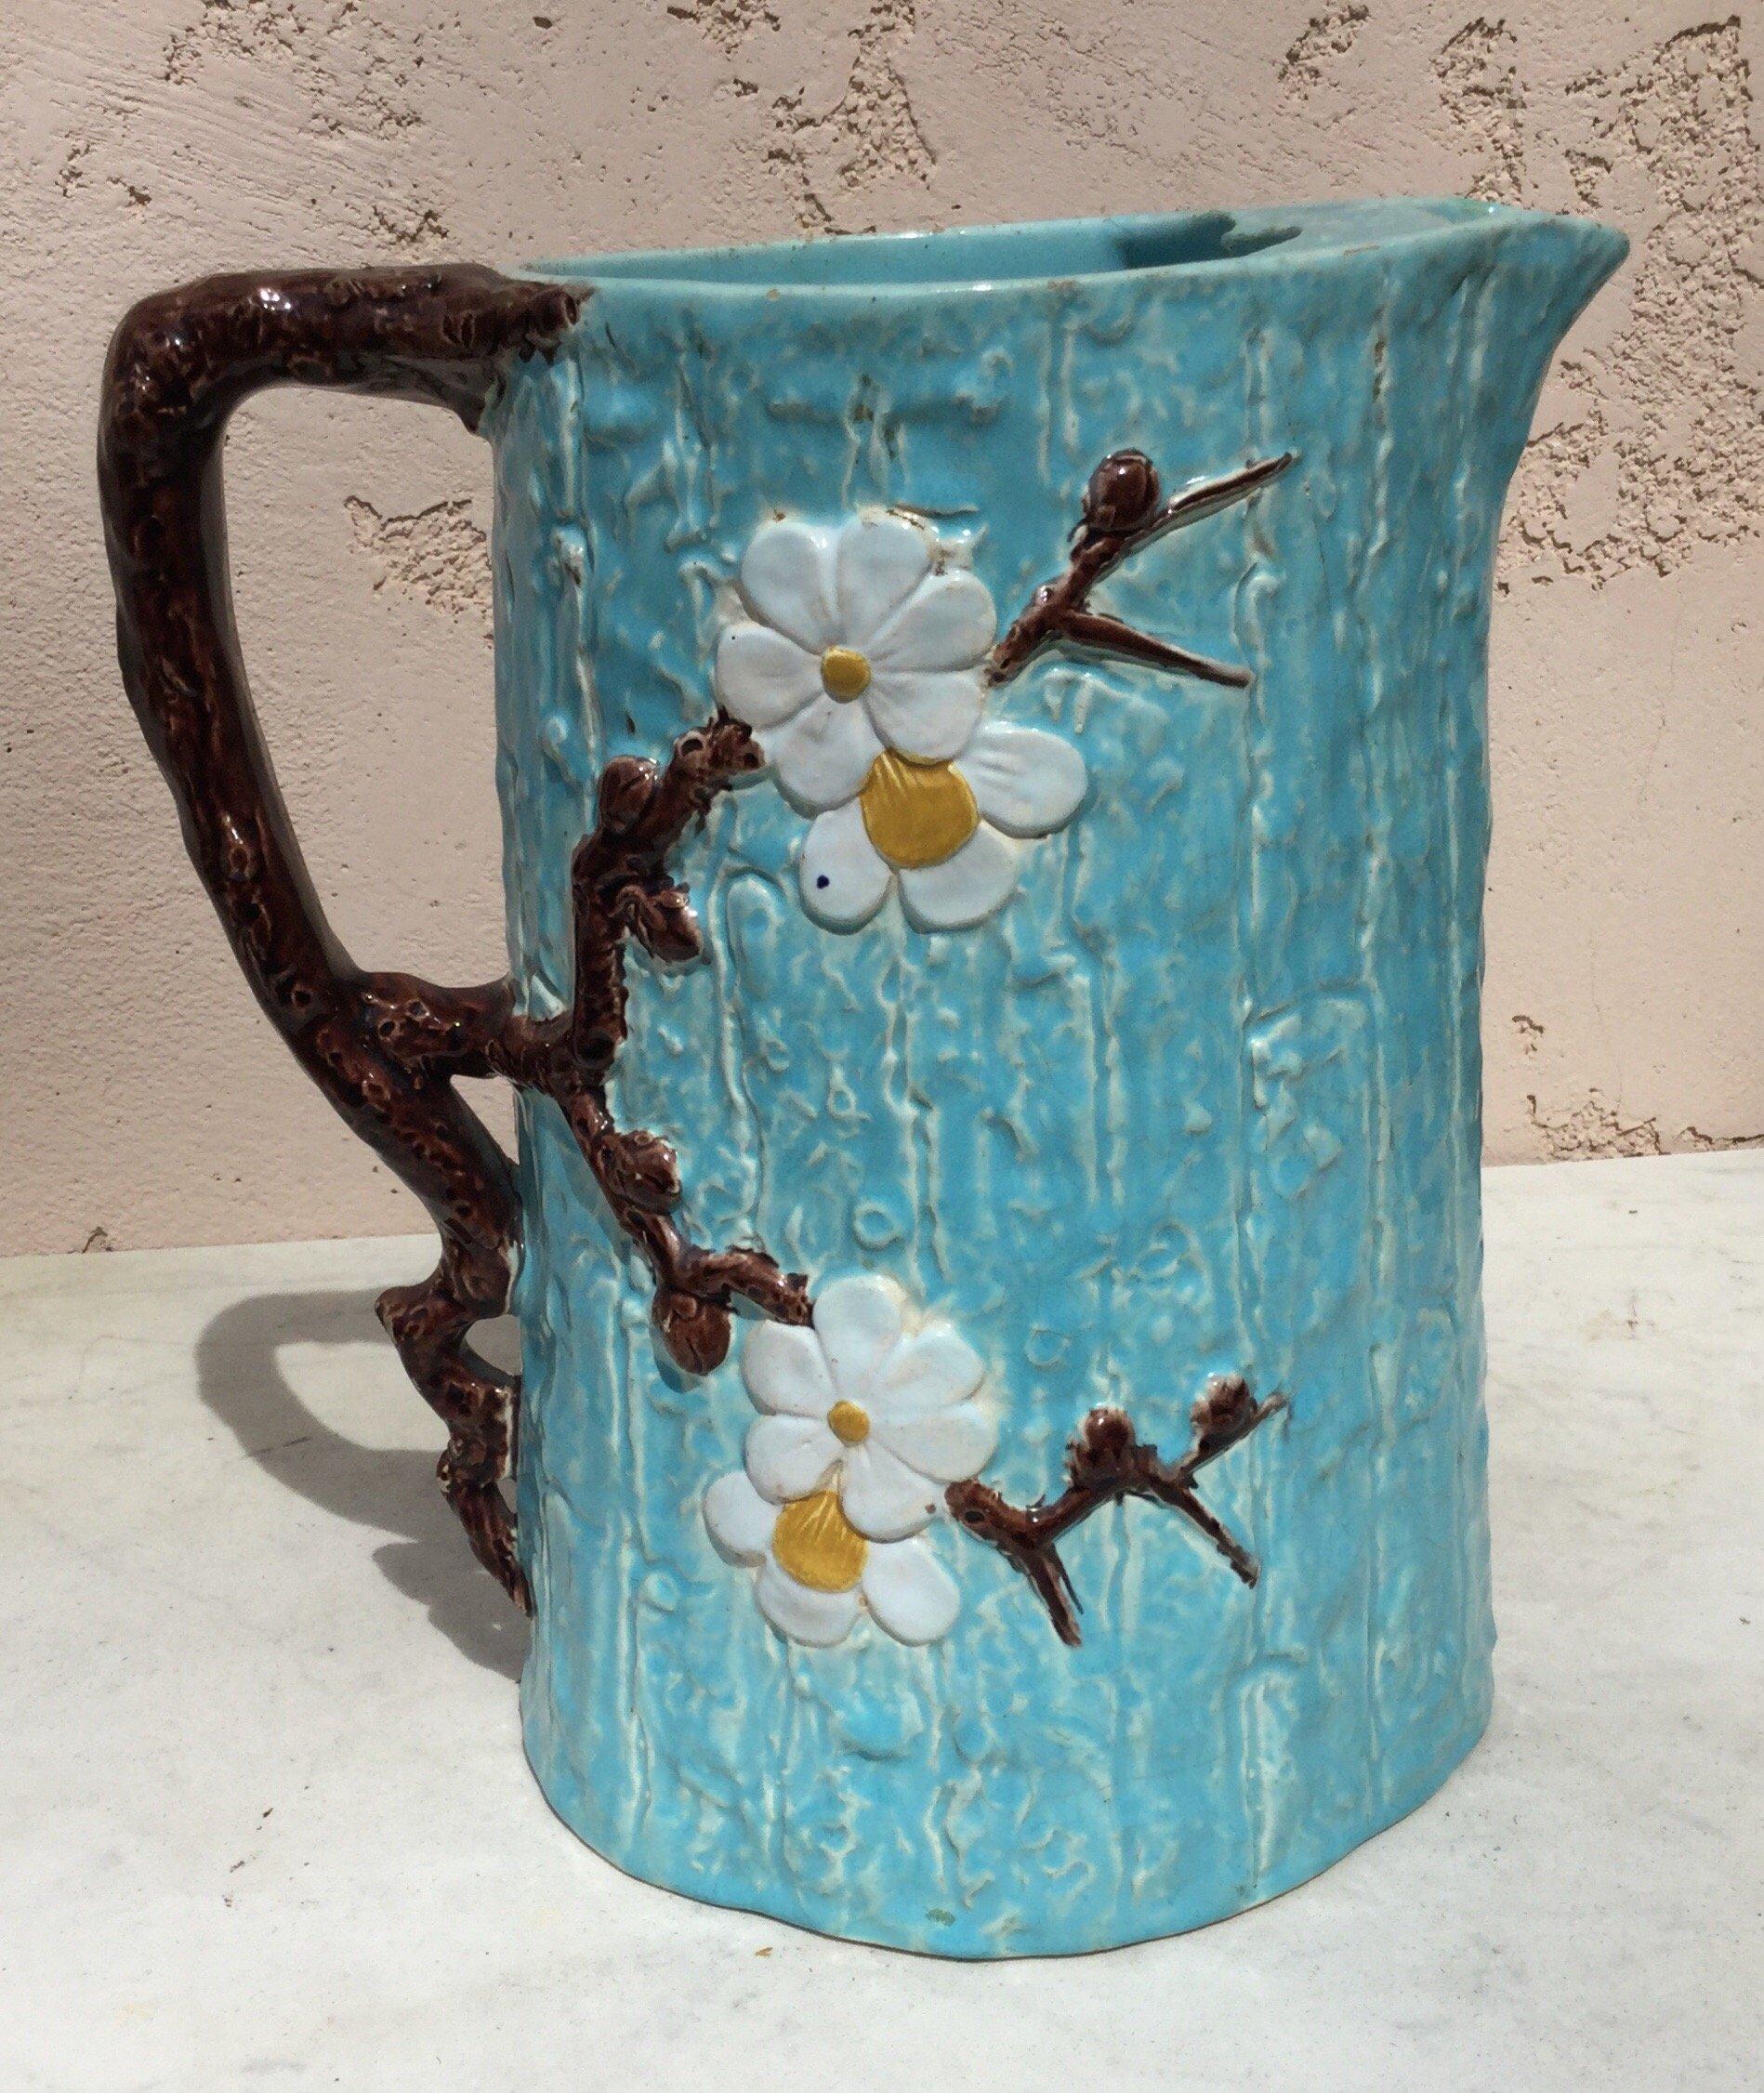 Very large Victorian aqua Majolica Dogwood flowers pitcher signed Joseph Holdcroft, circa 1890.
Rustic style.
Hairlines.